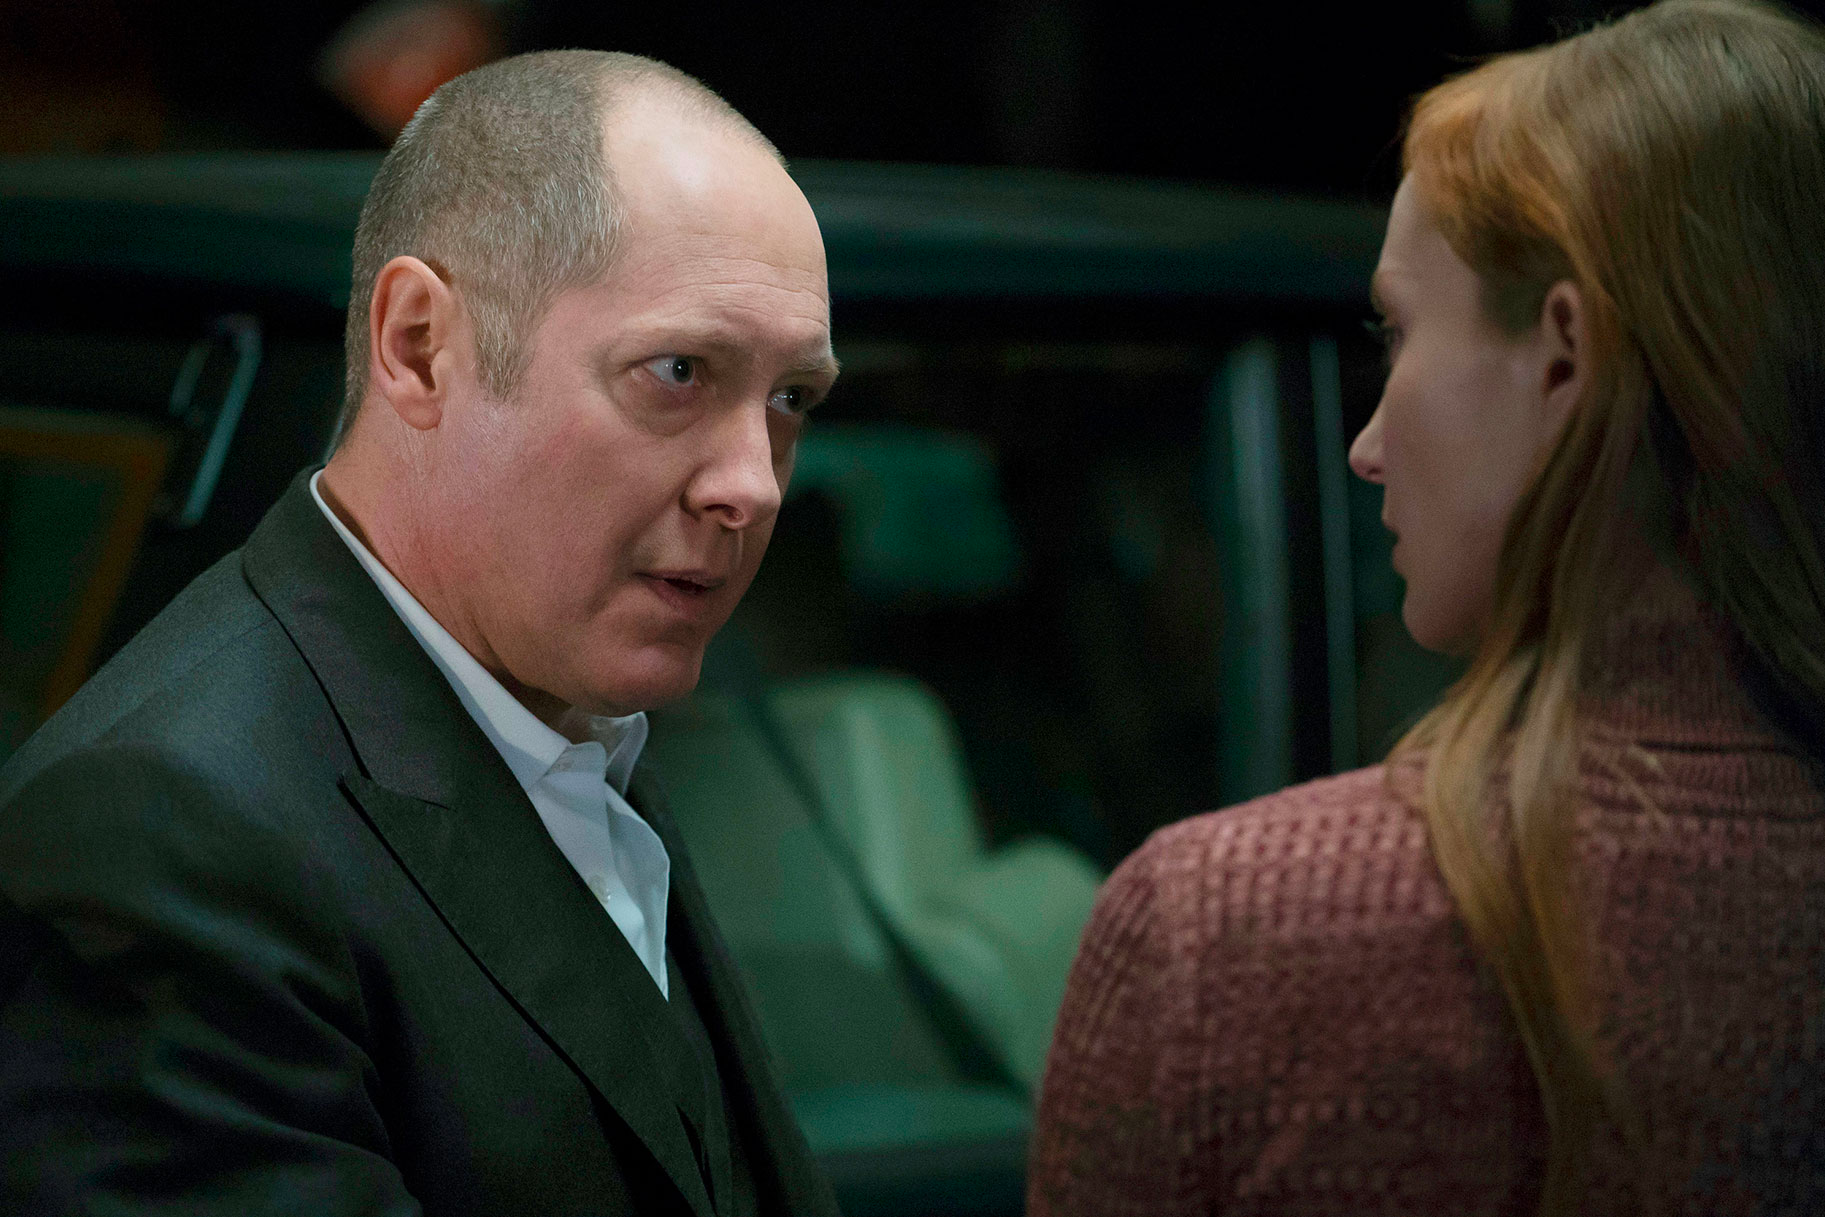 Red is talking to a woman on "The Blacklist".